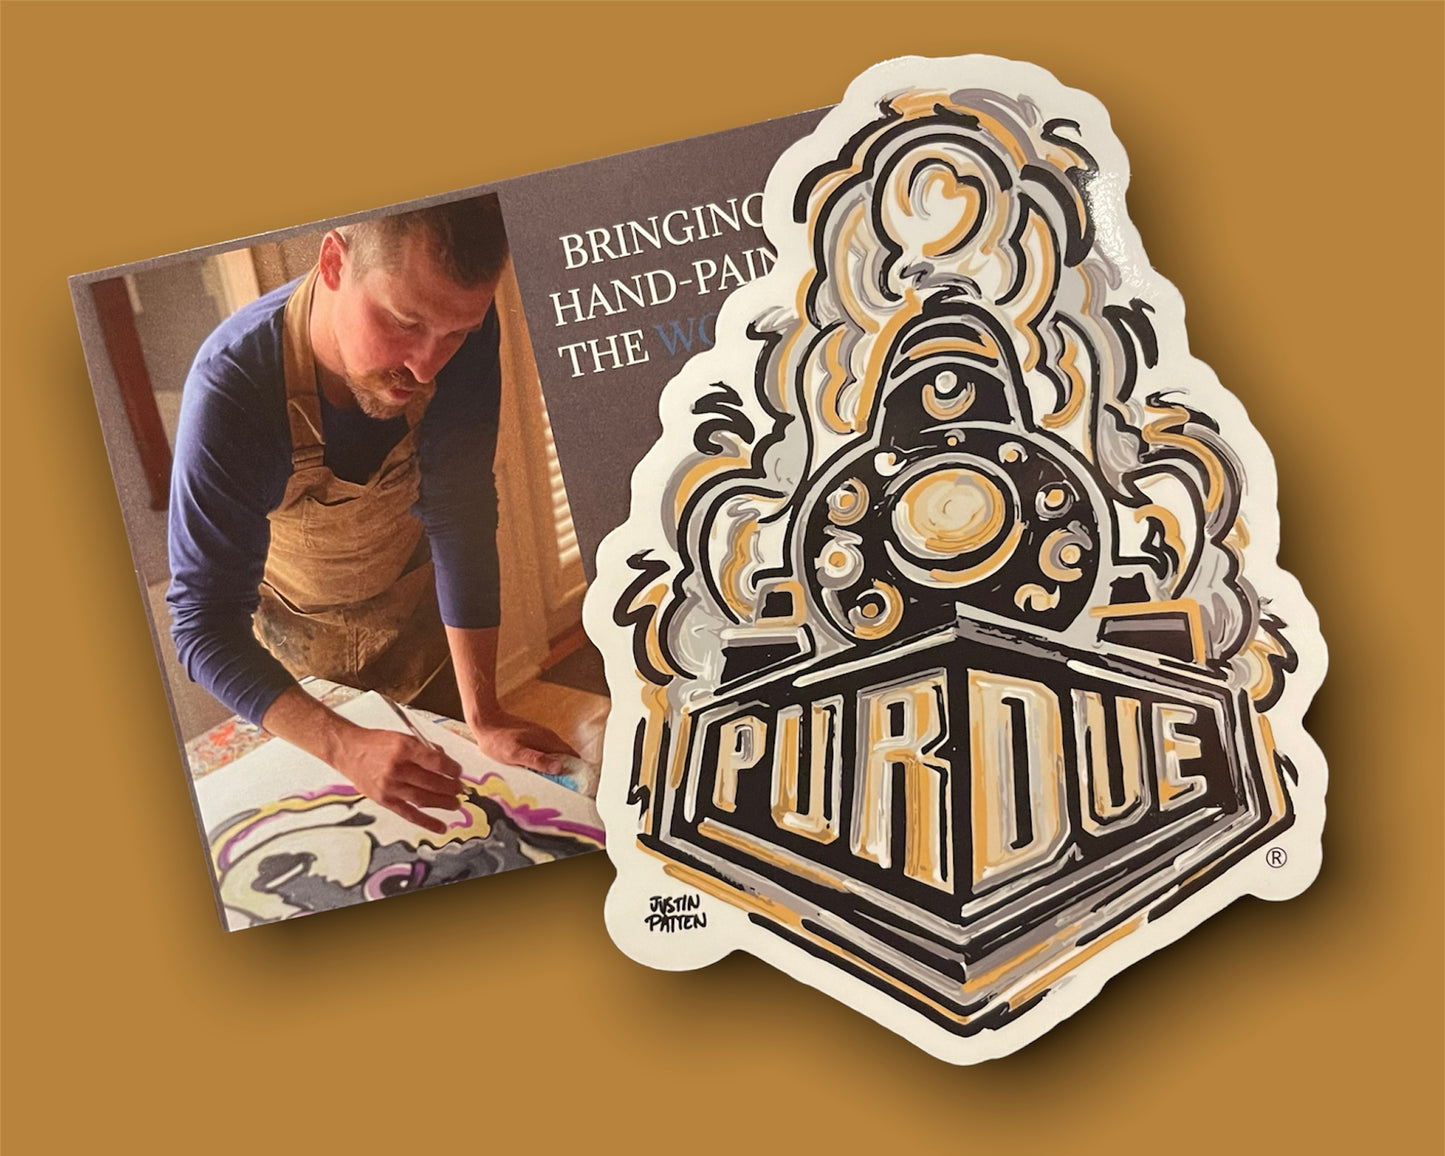 Purdue Boilermaker Special Magnet by Justin Patten